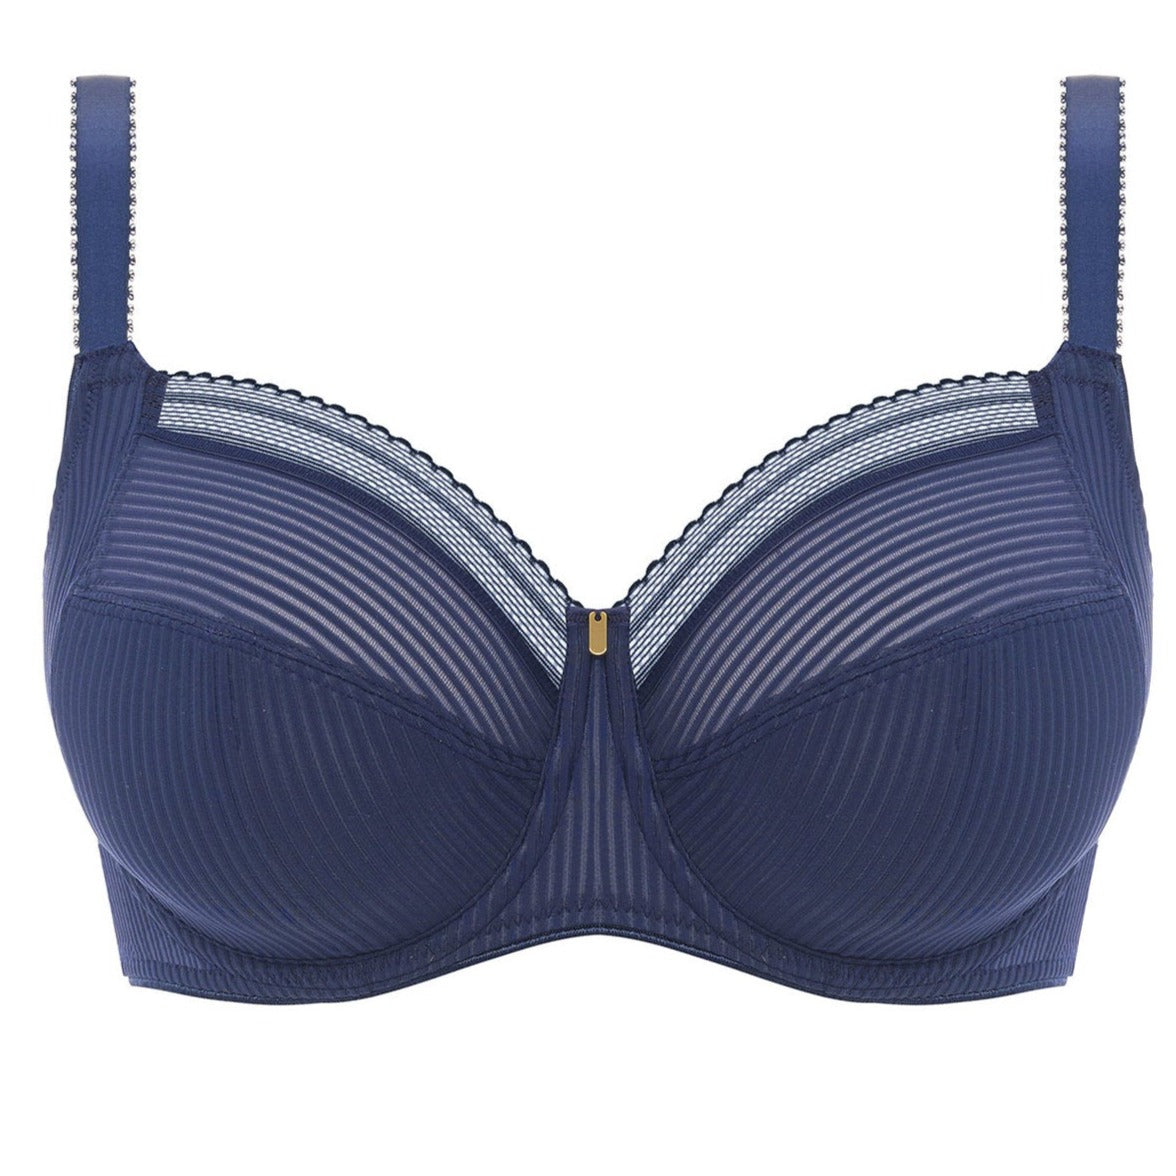 FL3091NAY Fusion Full Cup Side Support Bra